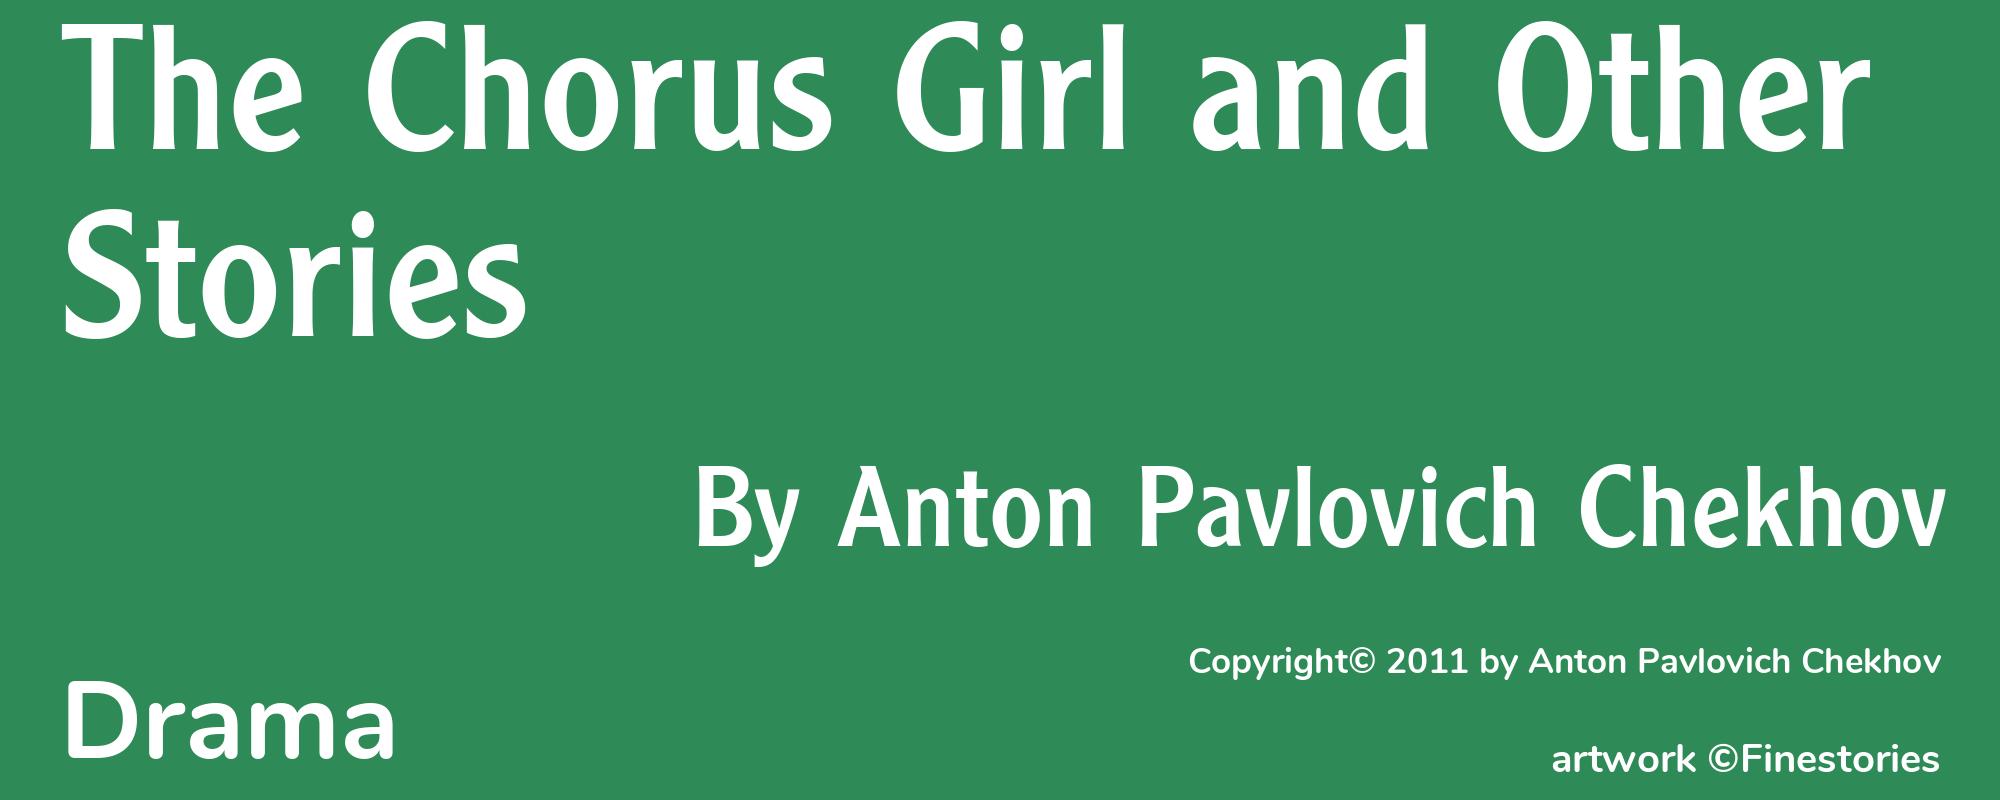 The Chorus Girl and Other Stories - Cover